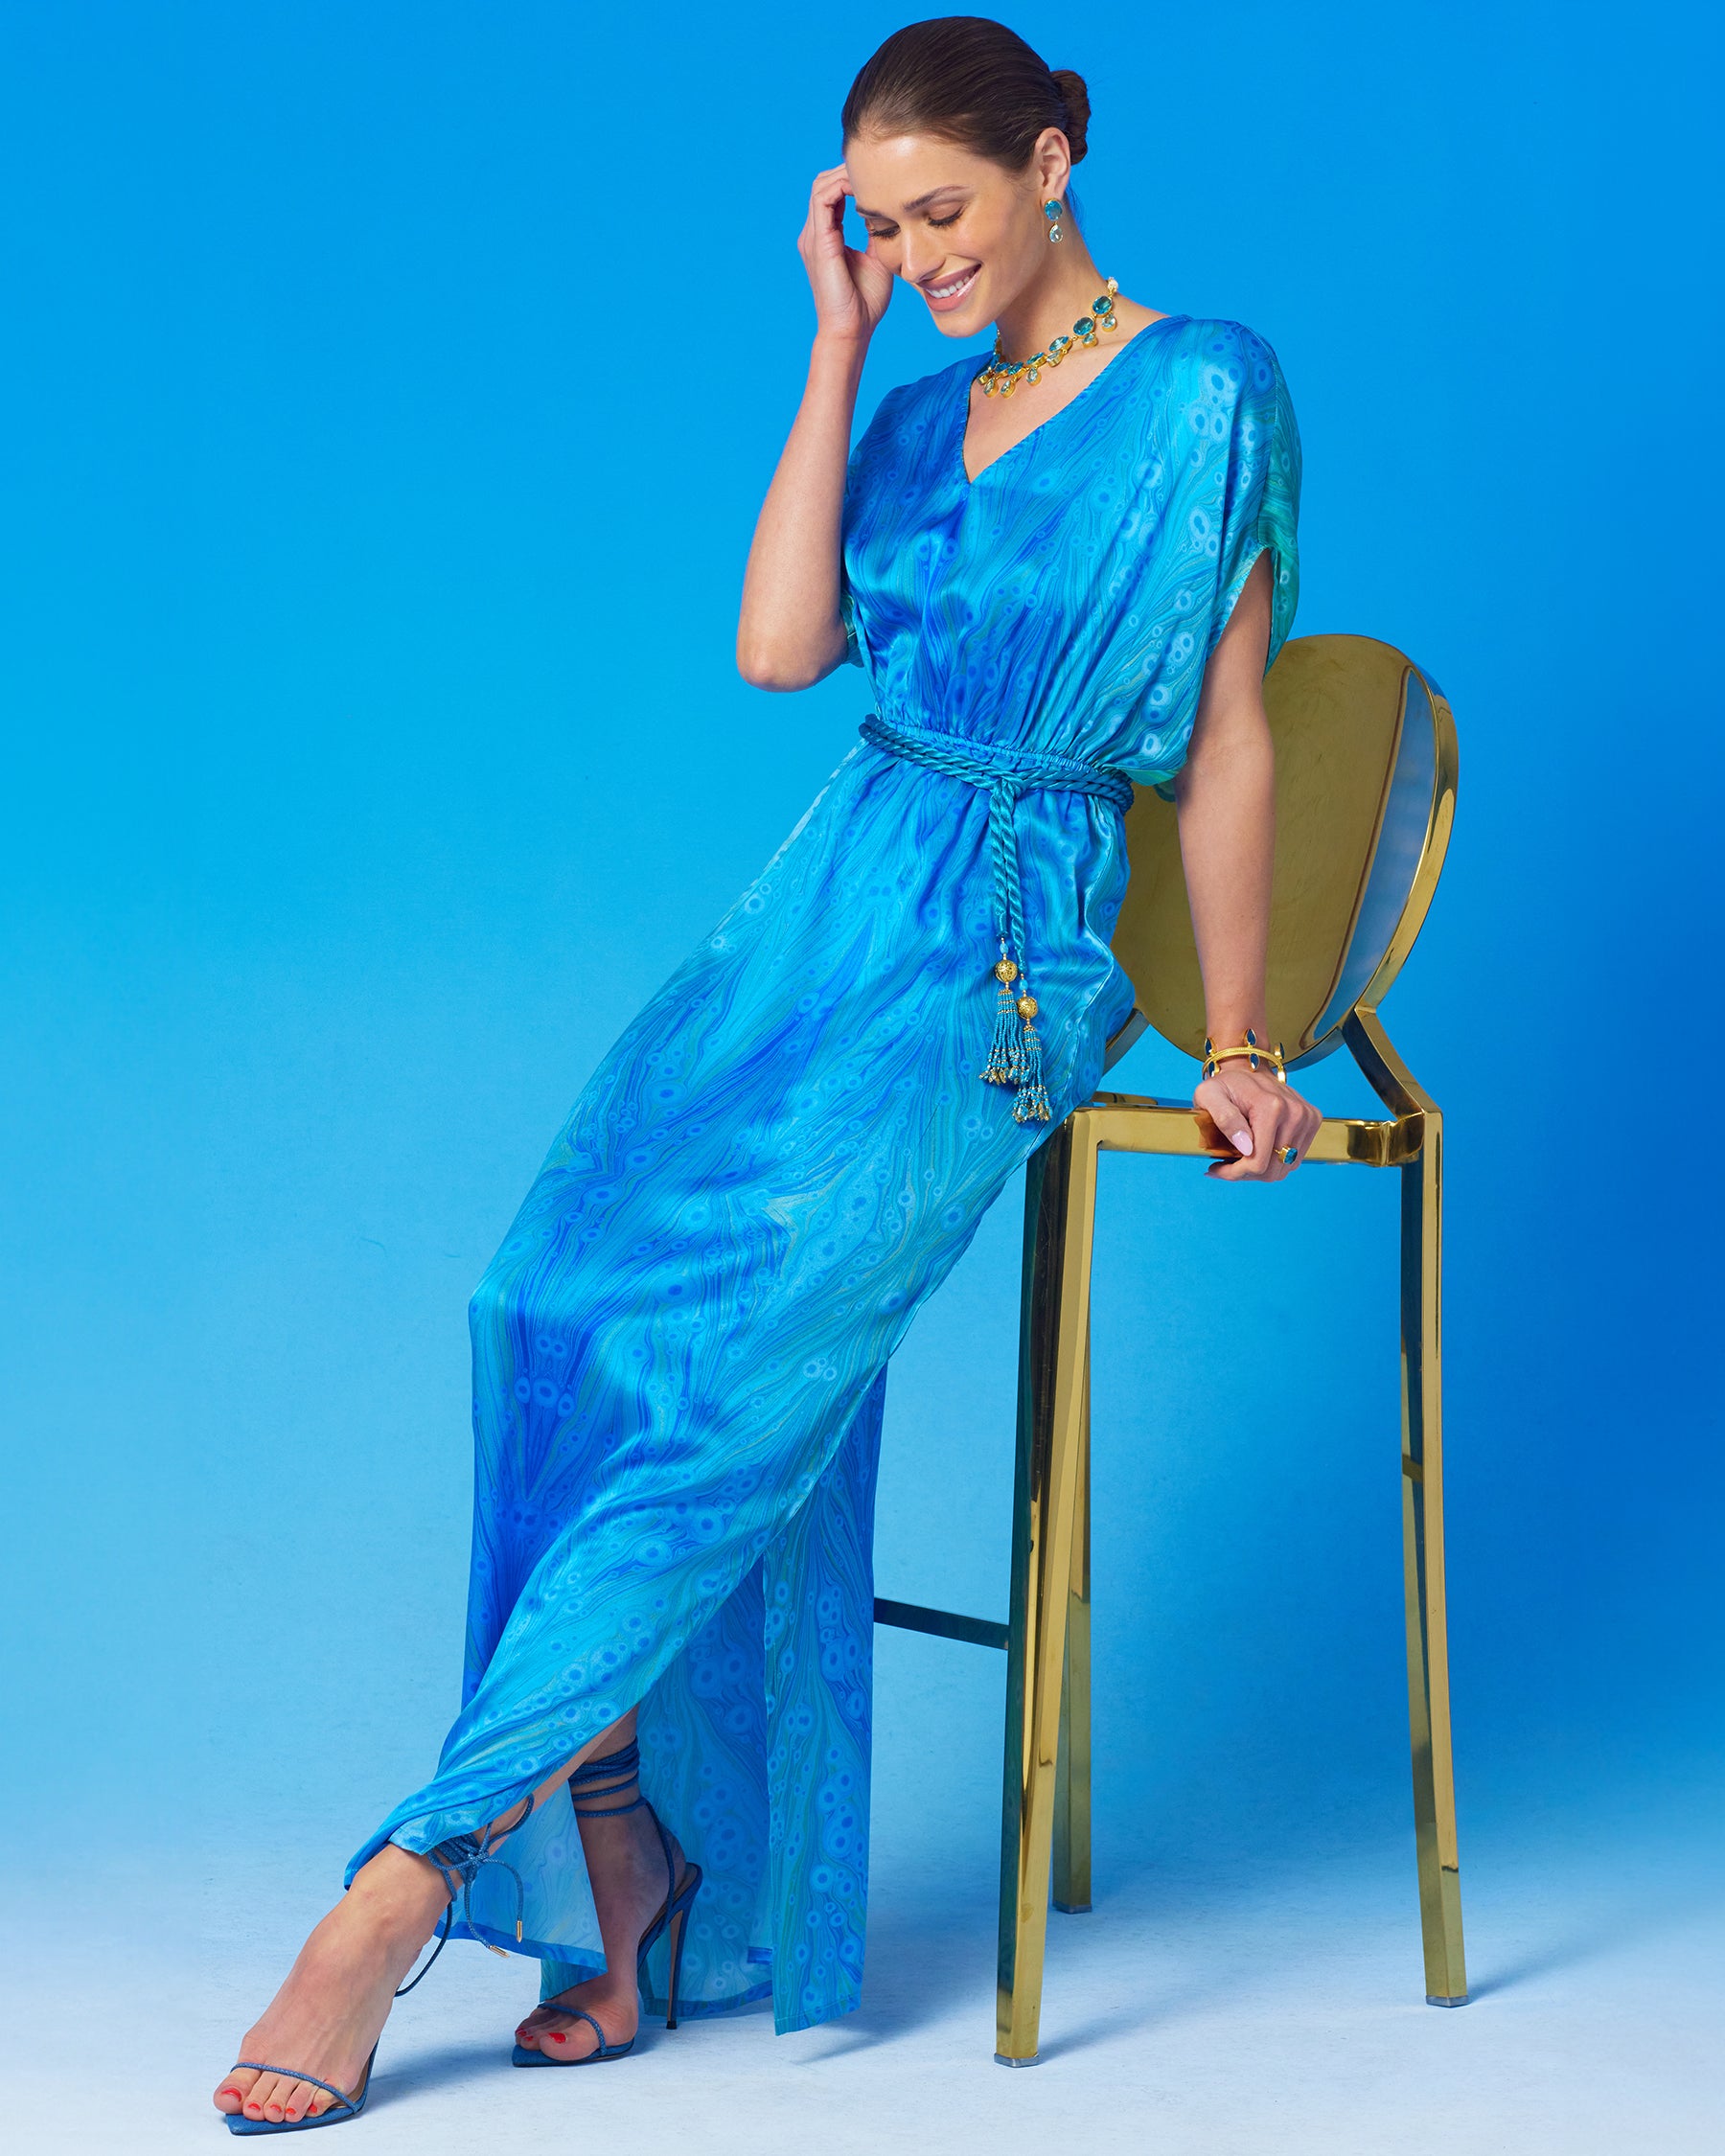 Calliope Long Silk Dress in Sea Nymph Blues witting on a gold chair